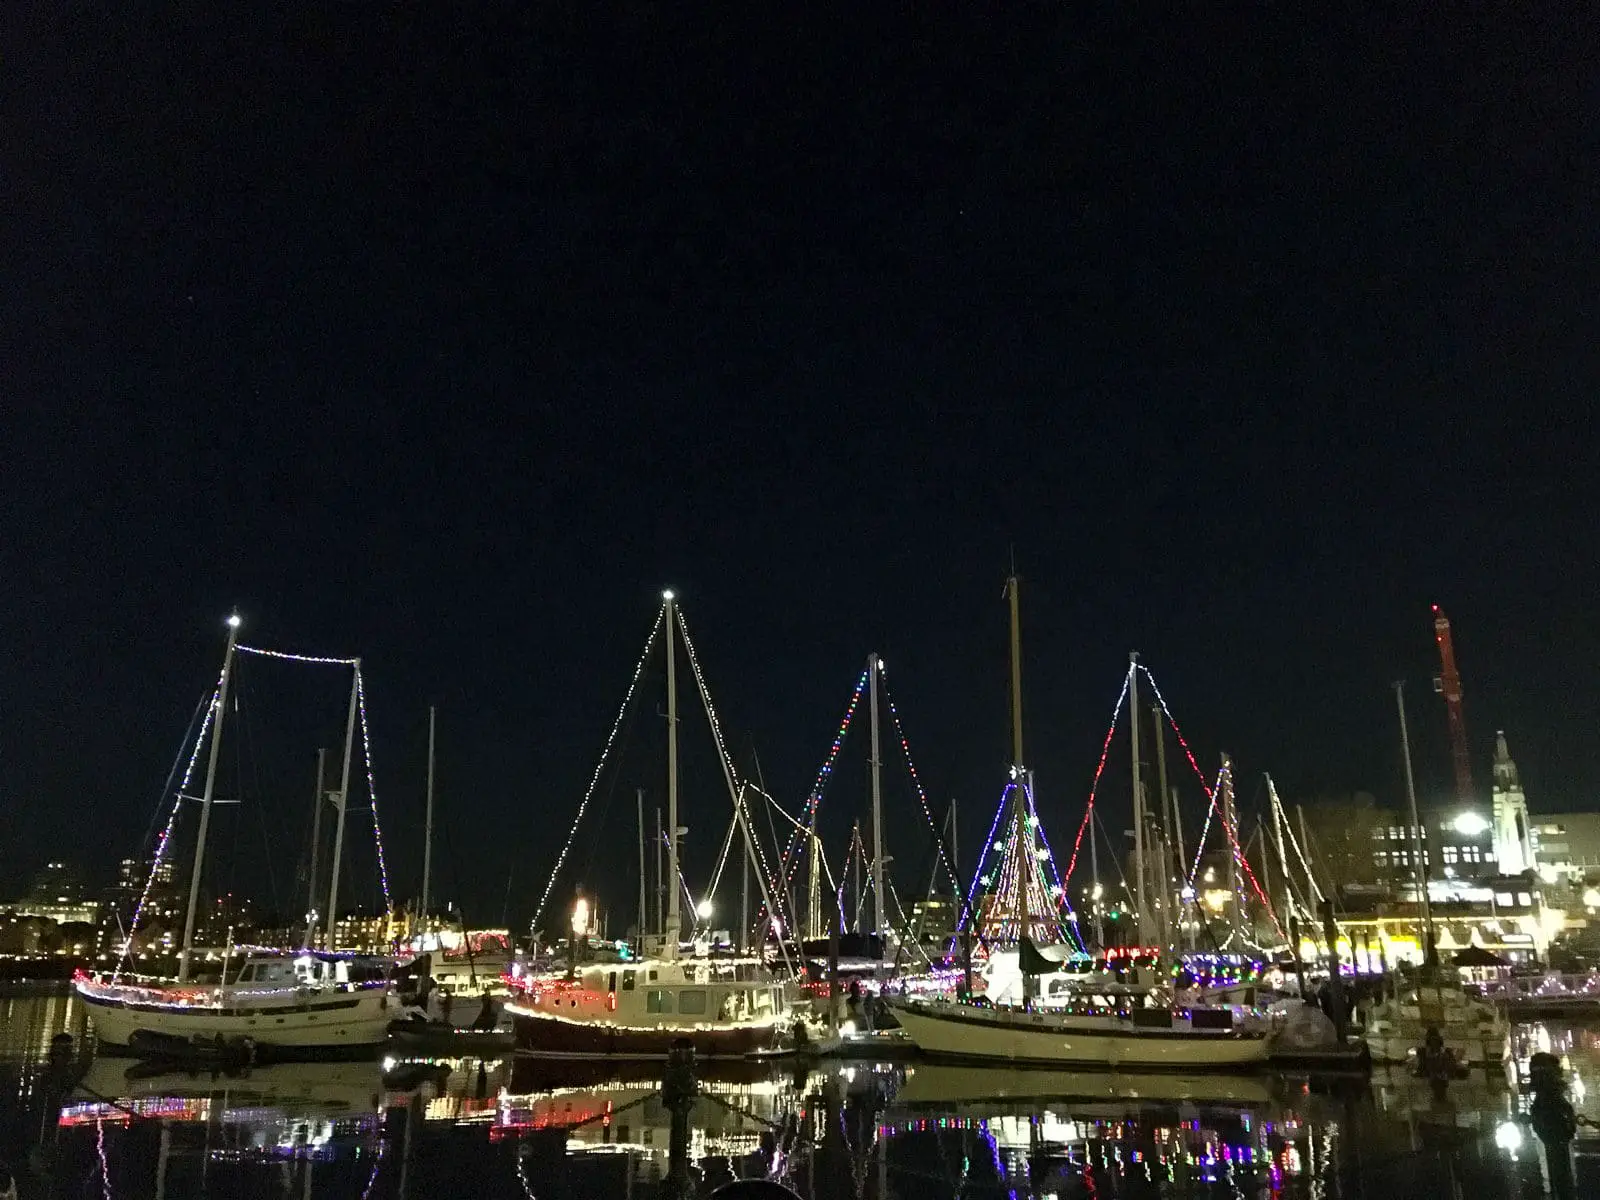 Christmas lights on the boats in the Inner Harbour